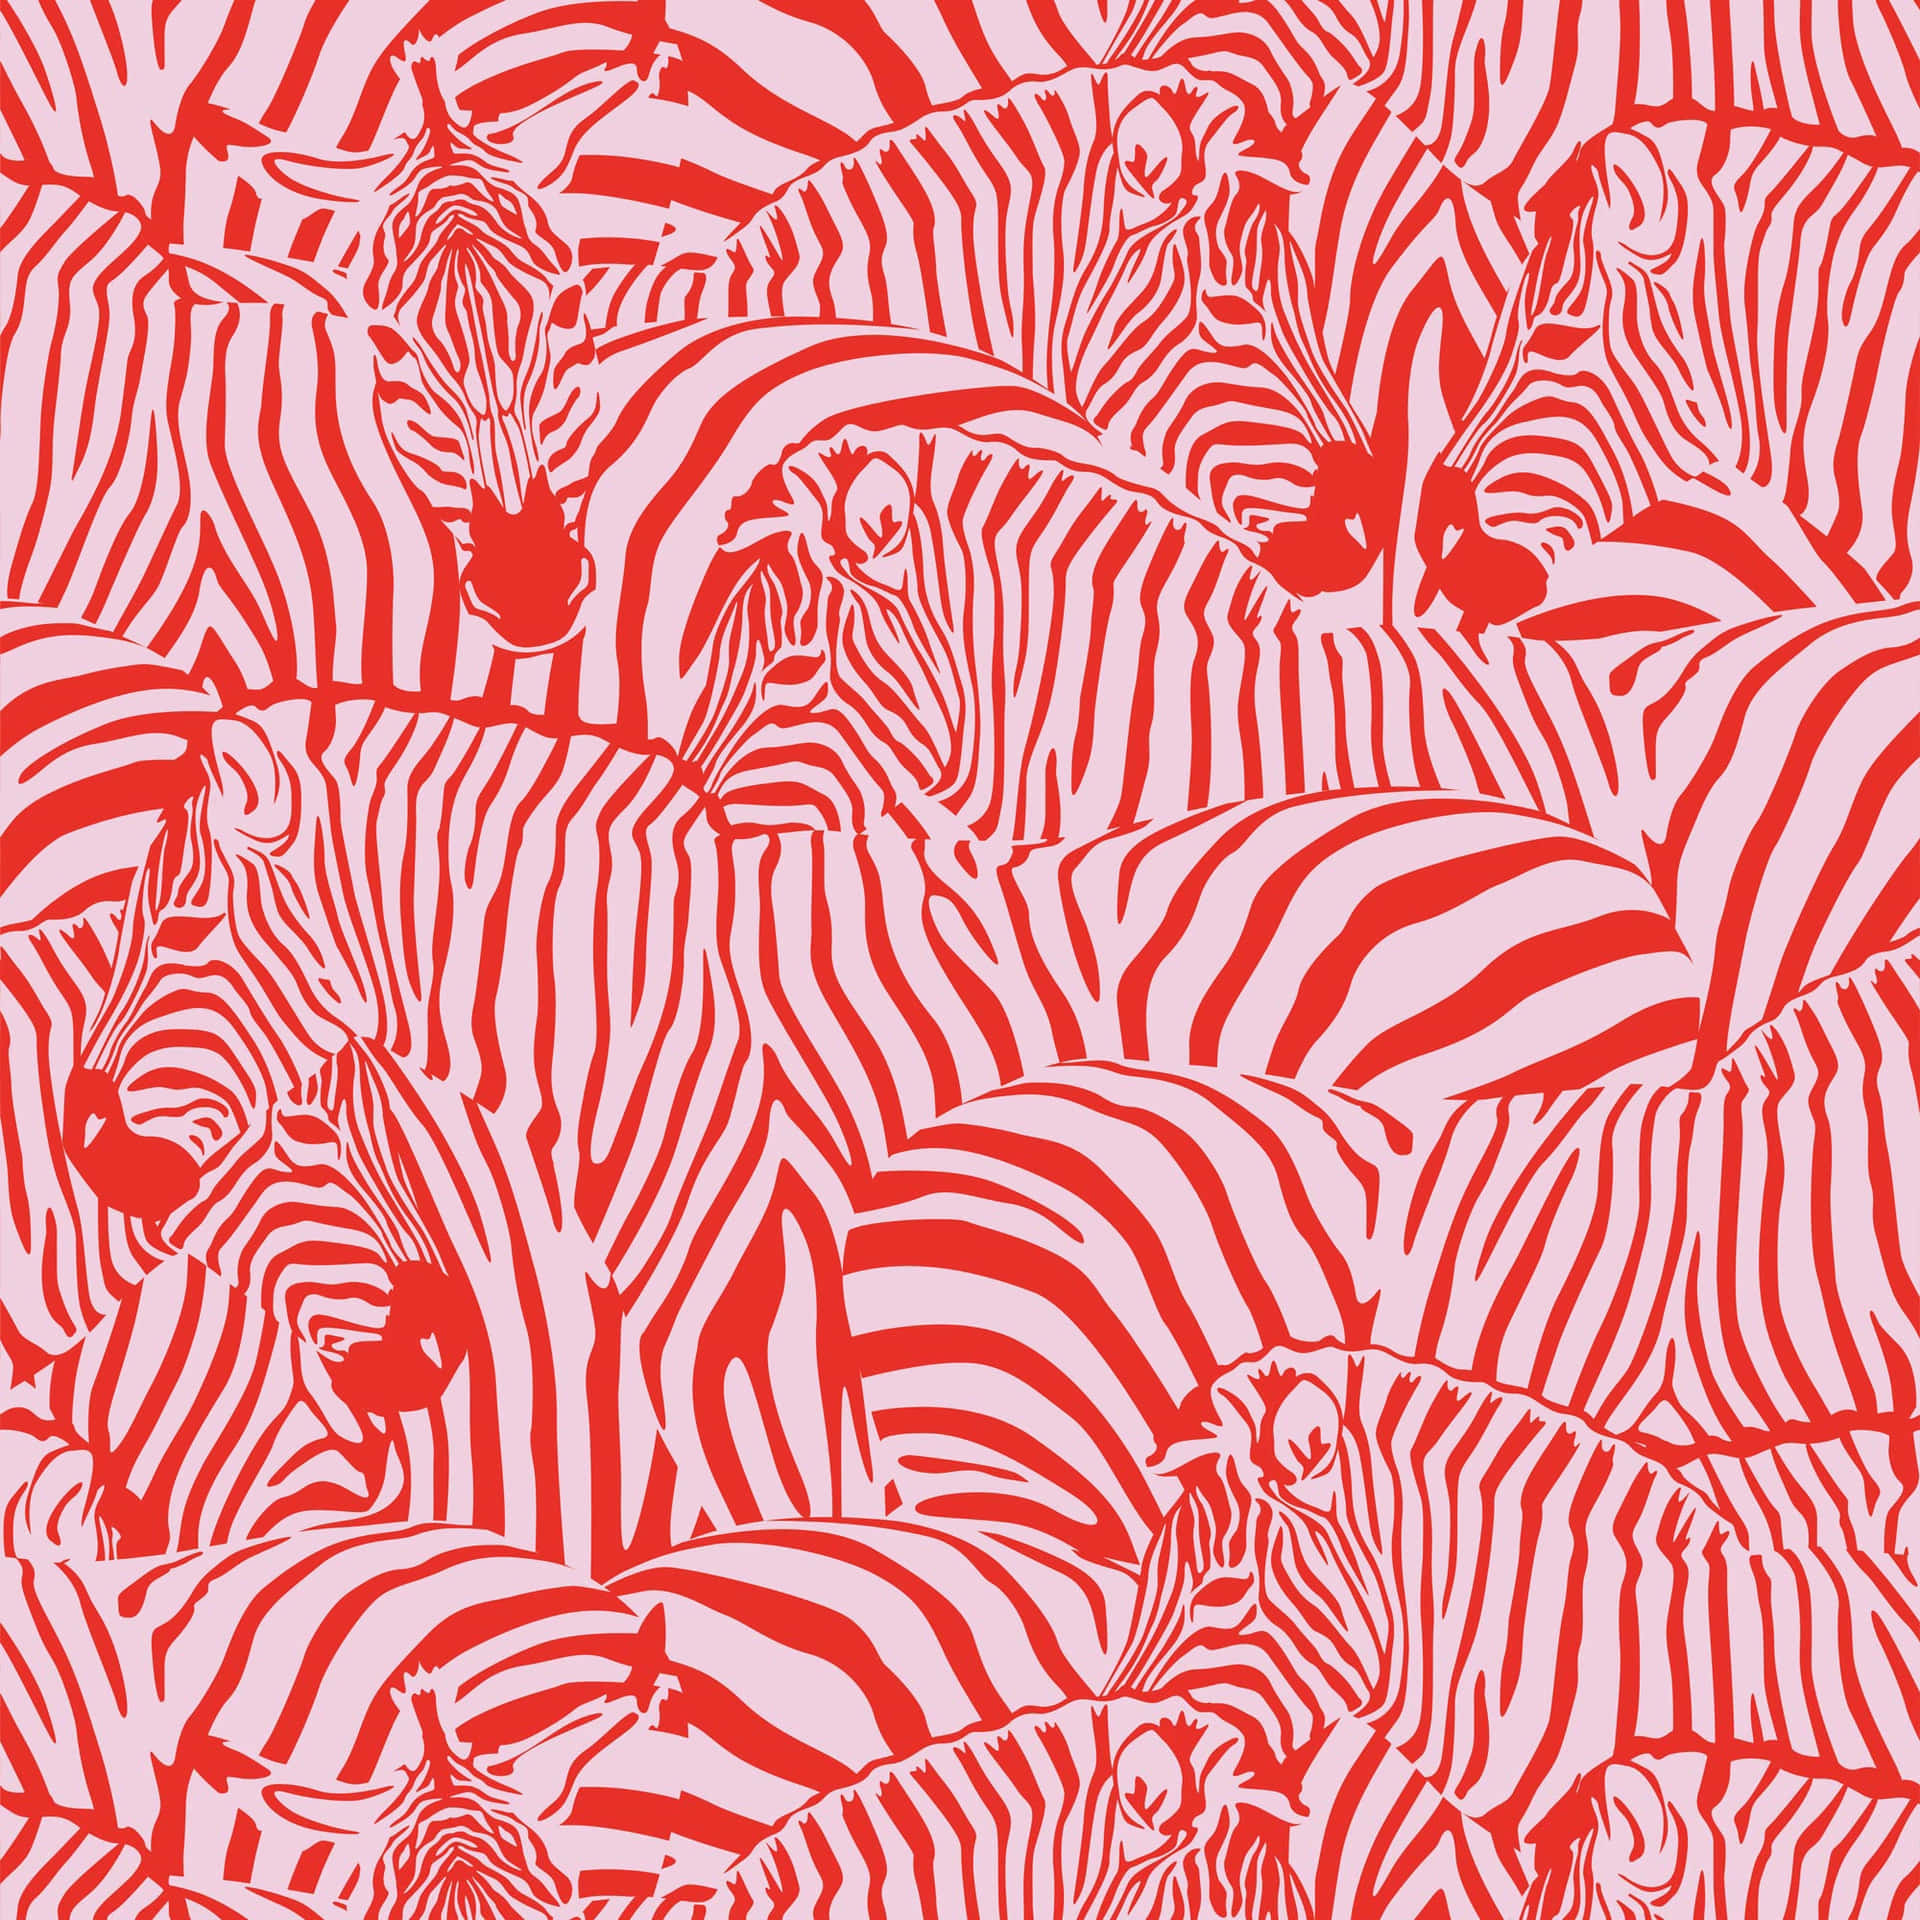 Funky, Bold, And Unique Pink Zebra Decor Background